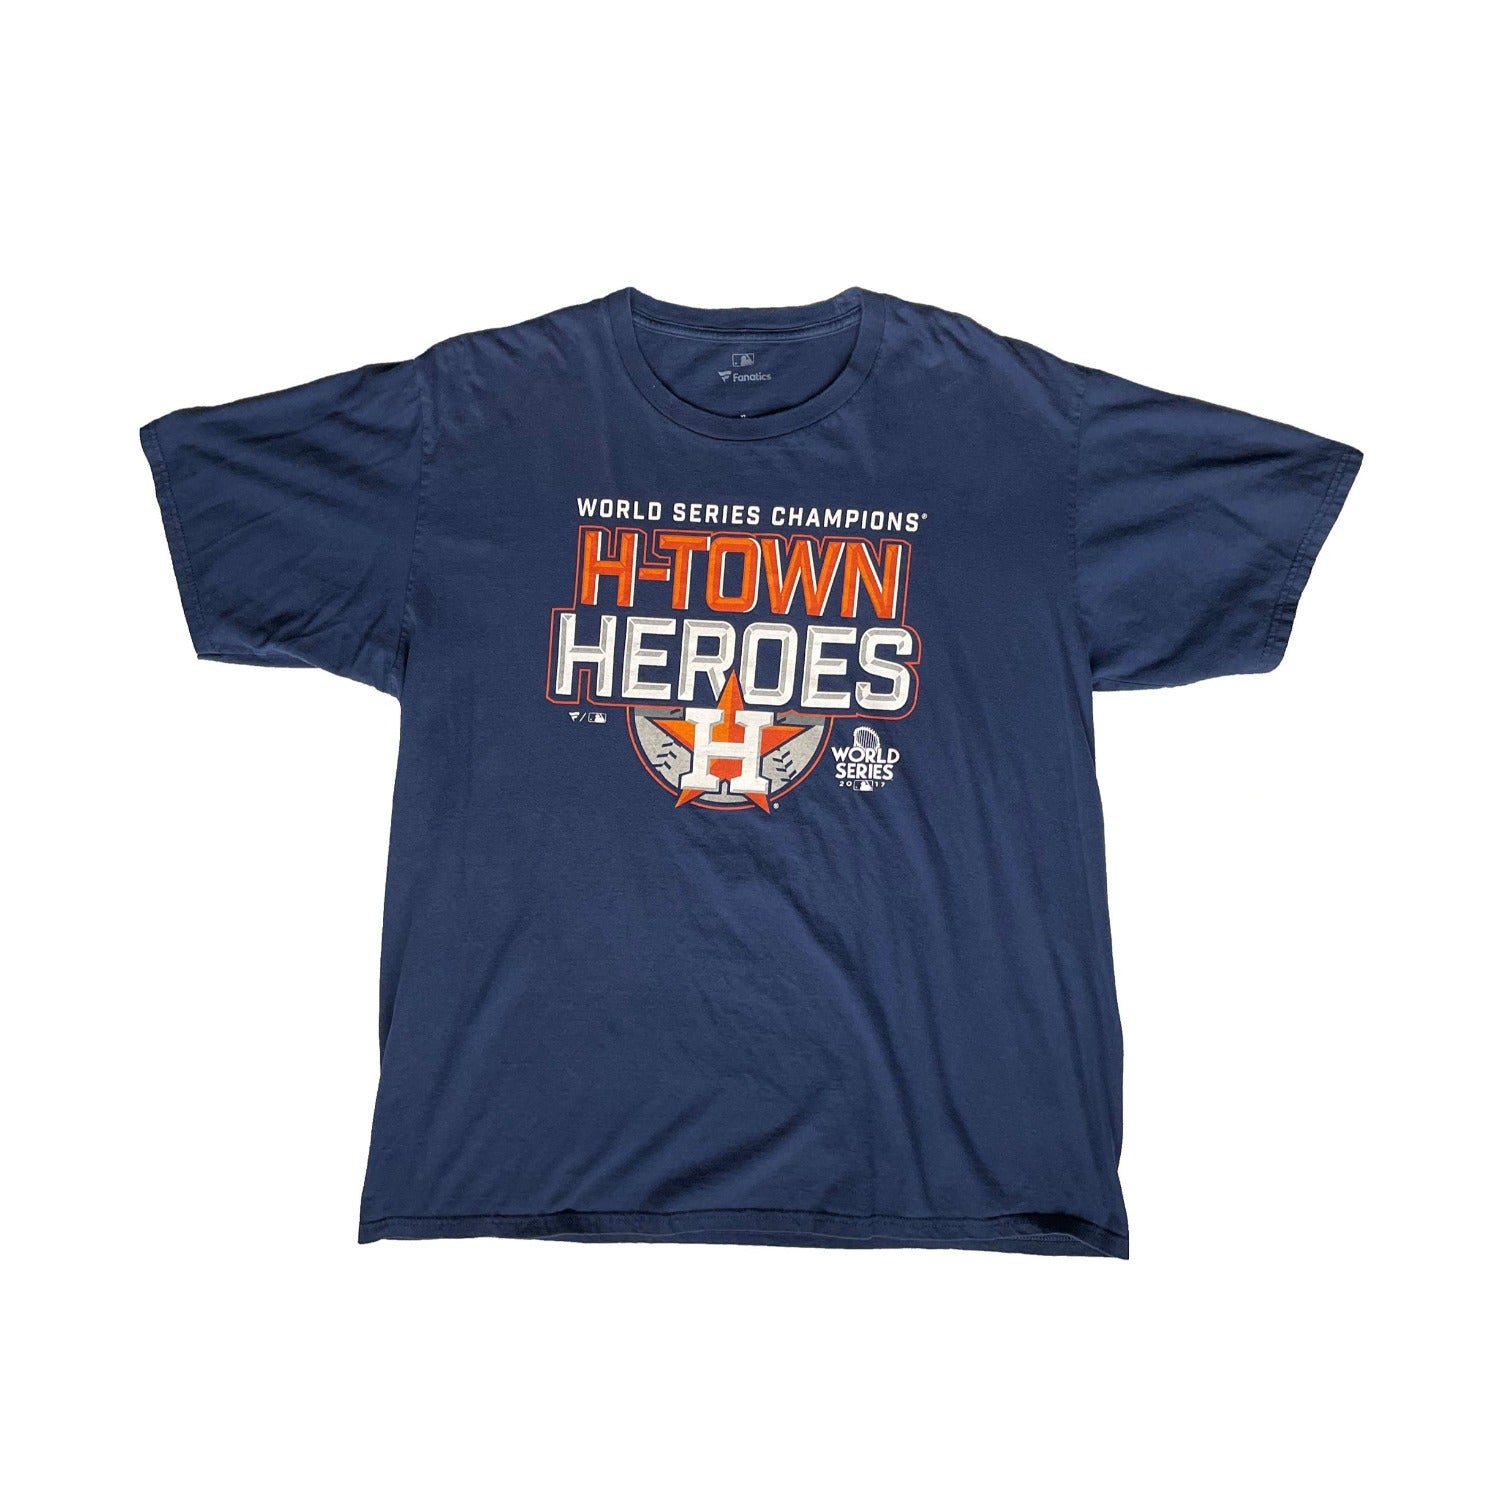 Houston Astros: 2017 World Series Champions T-Shirt, Youth Size M, Color  Blue